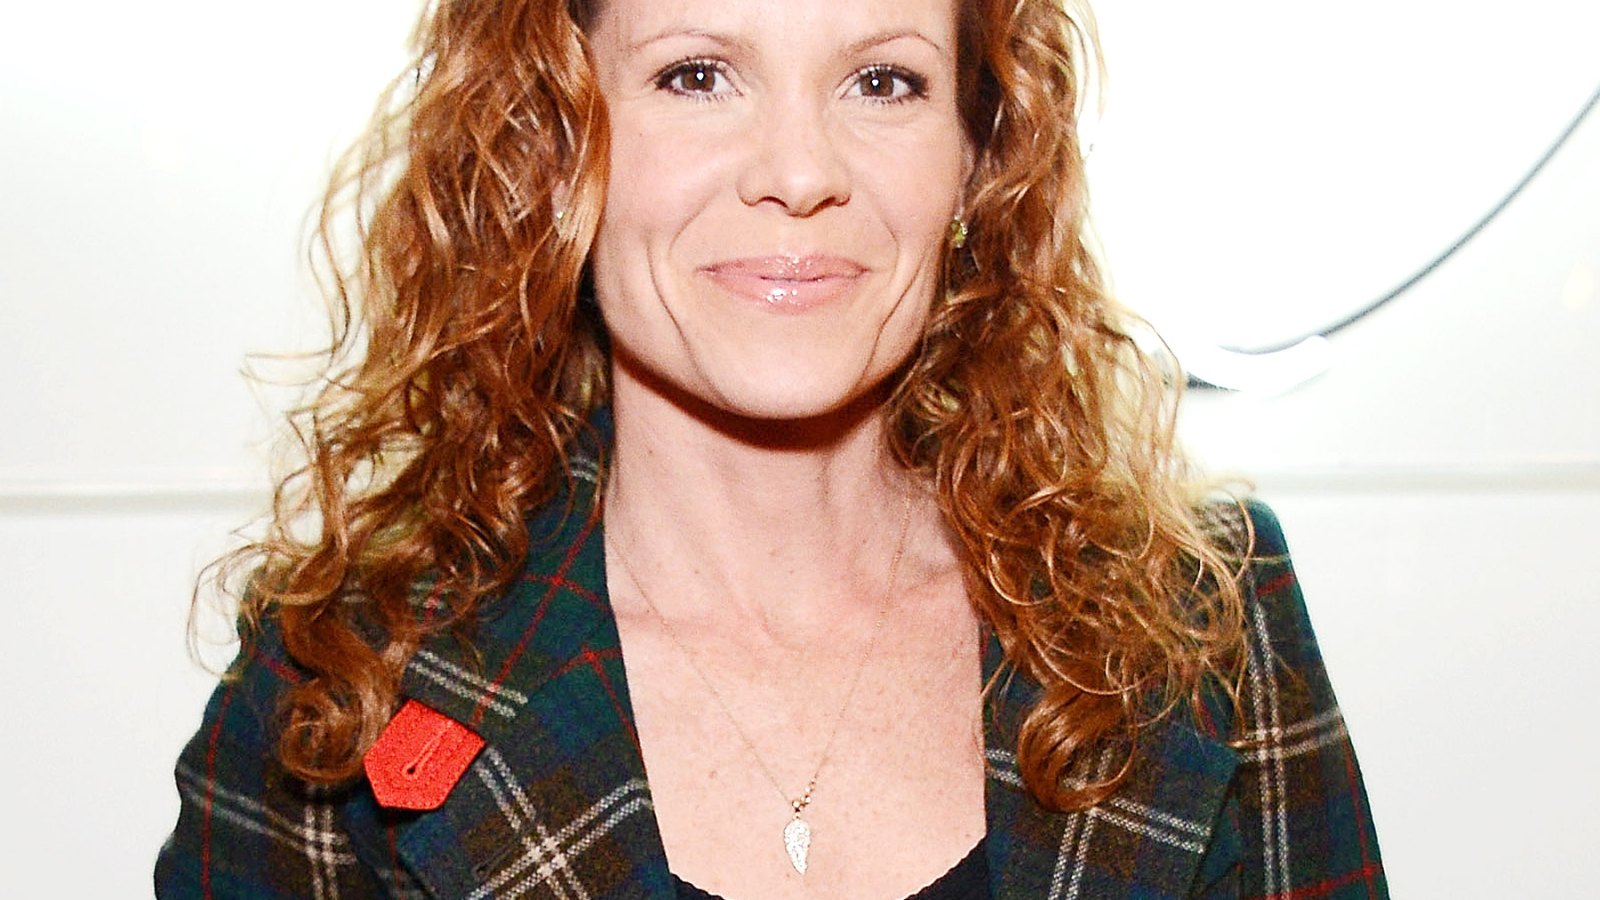 Robyn Lively attends an event on December 12, 2013